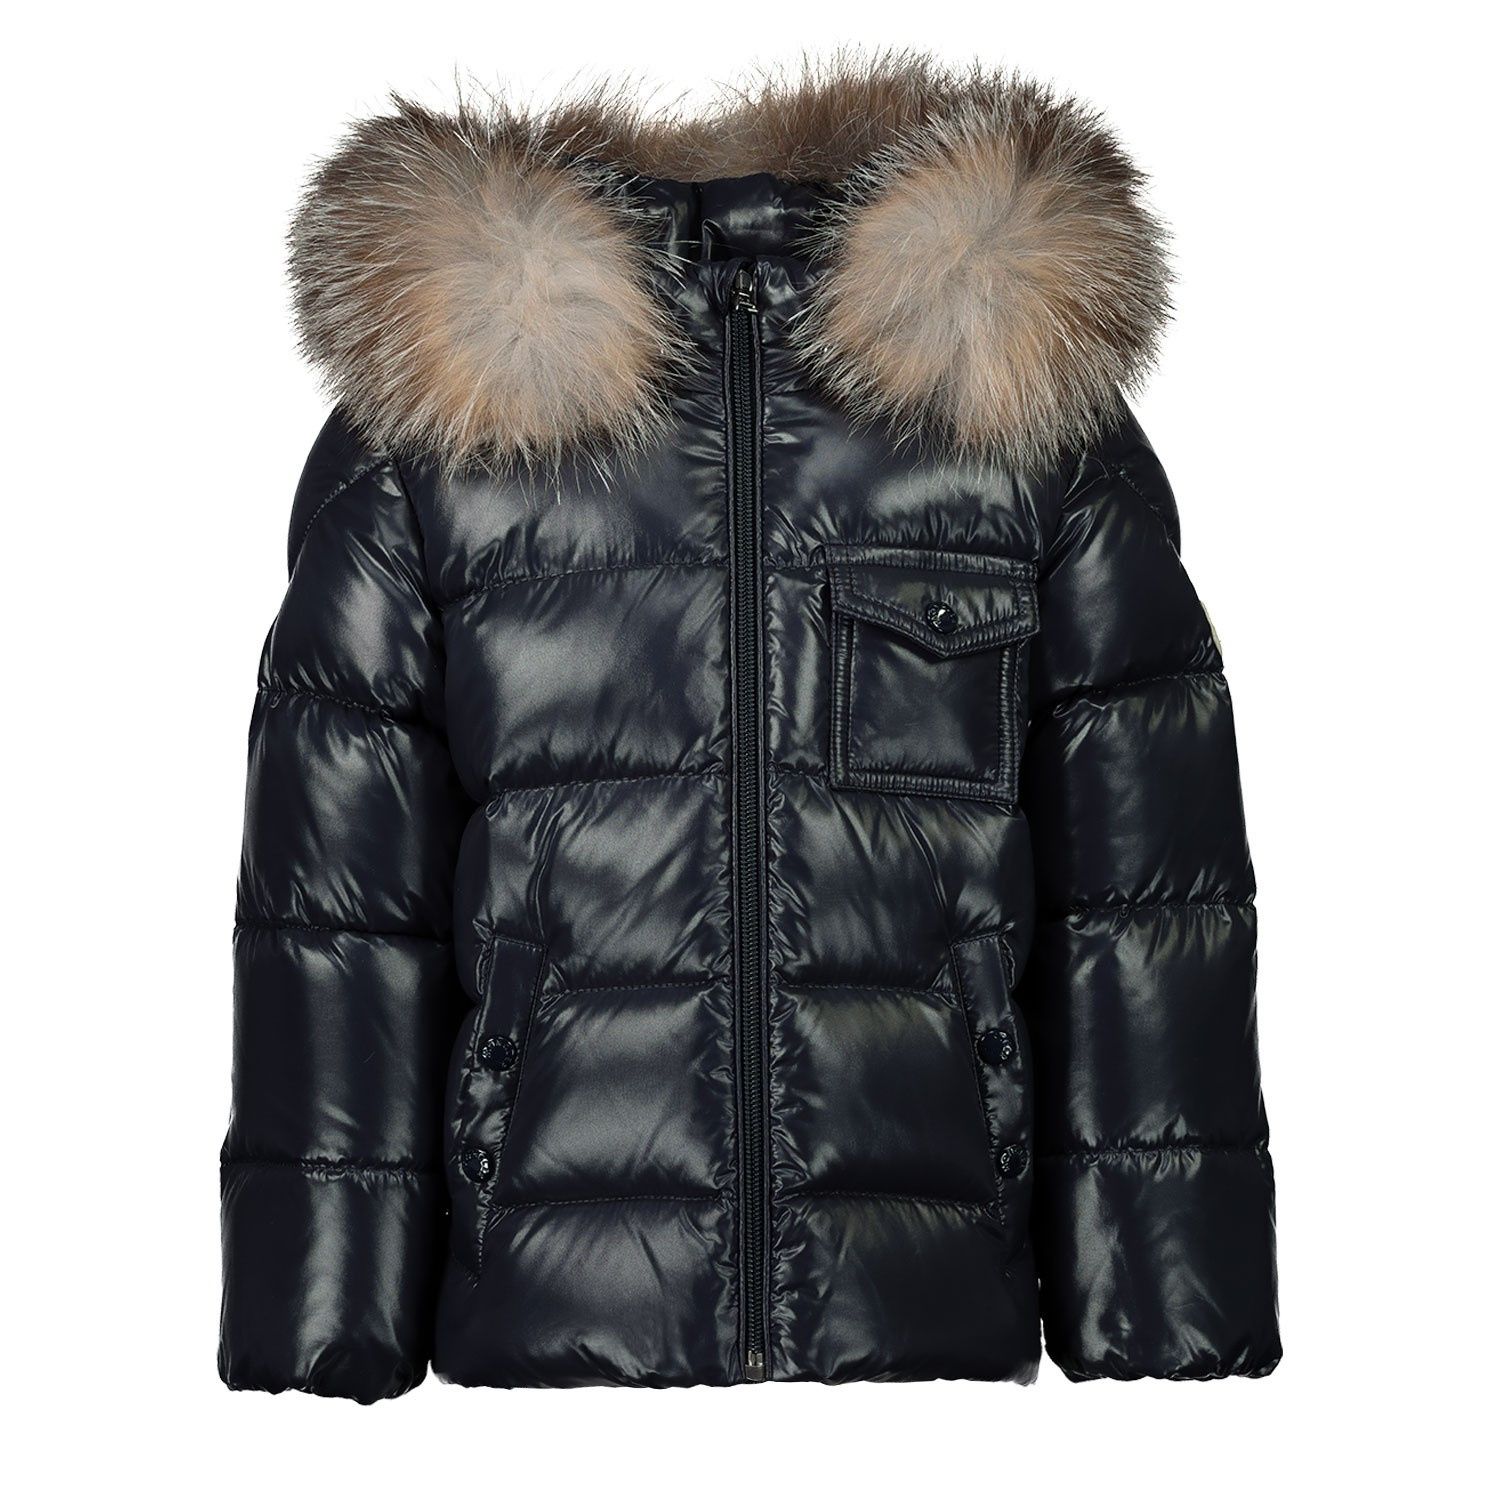 Picture of Moncler 1A52602 baby coat navy